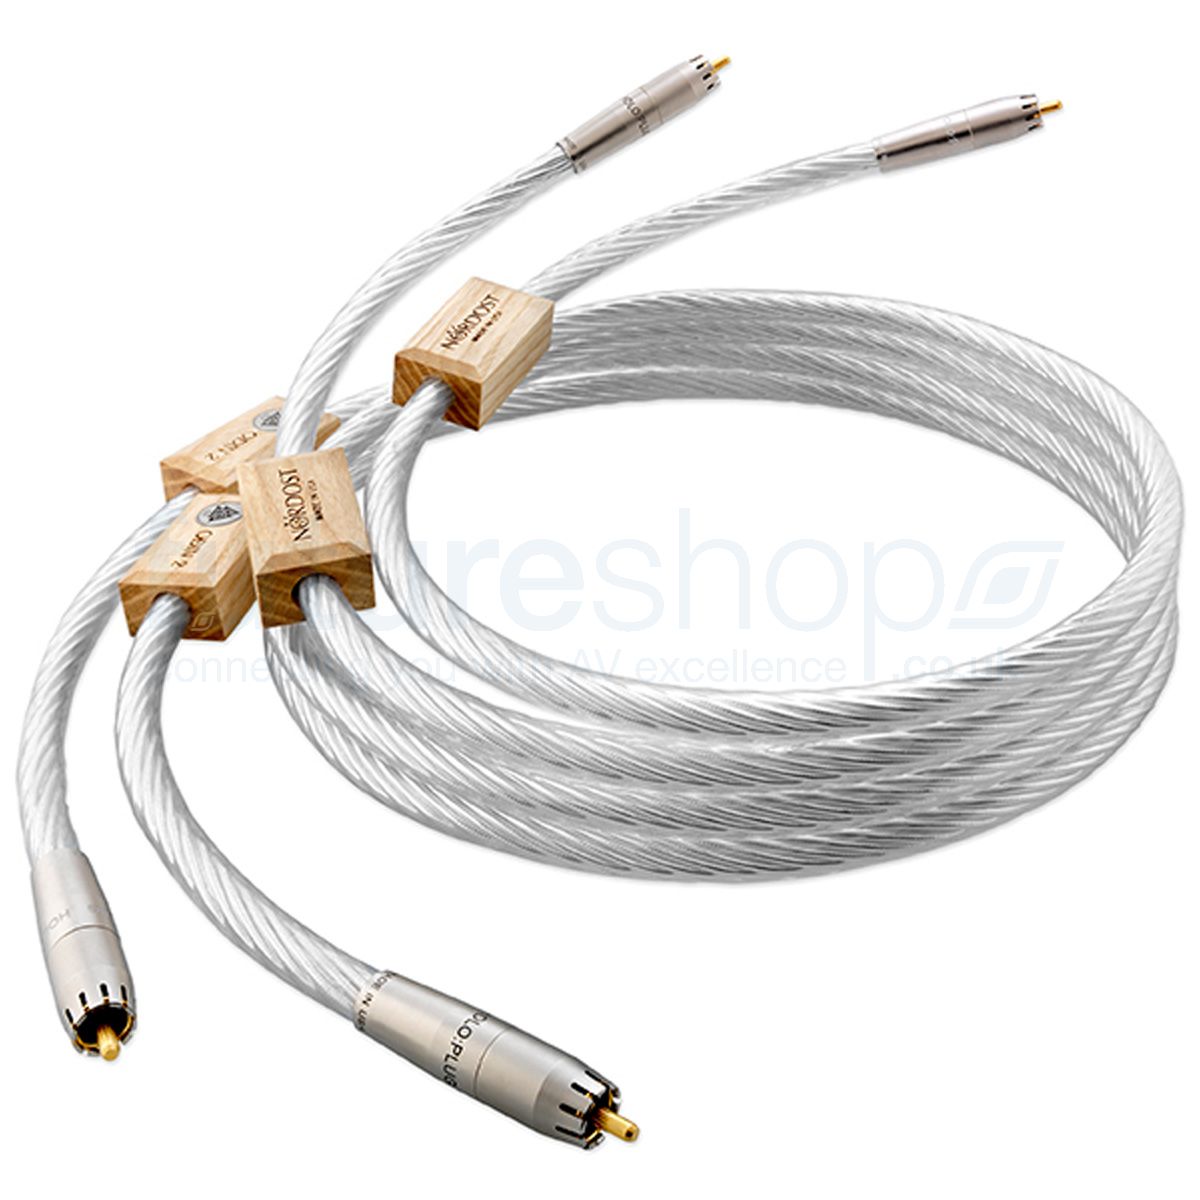 Nordost Odin 2 UK Mains Power Cable